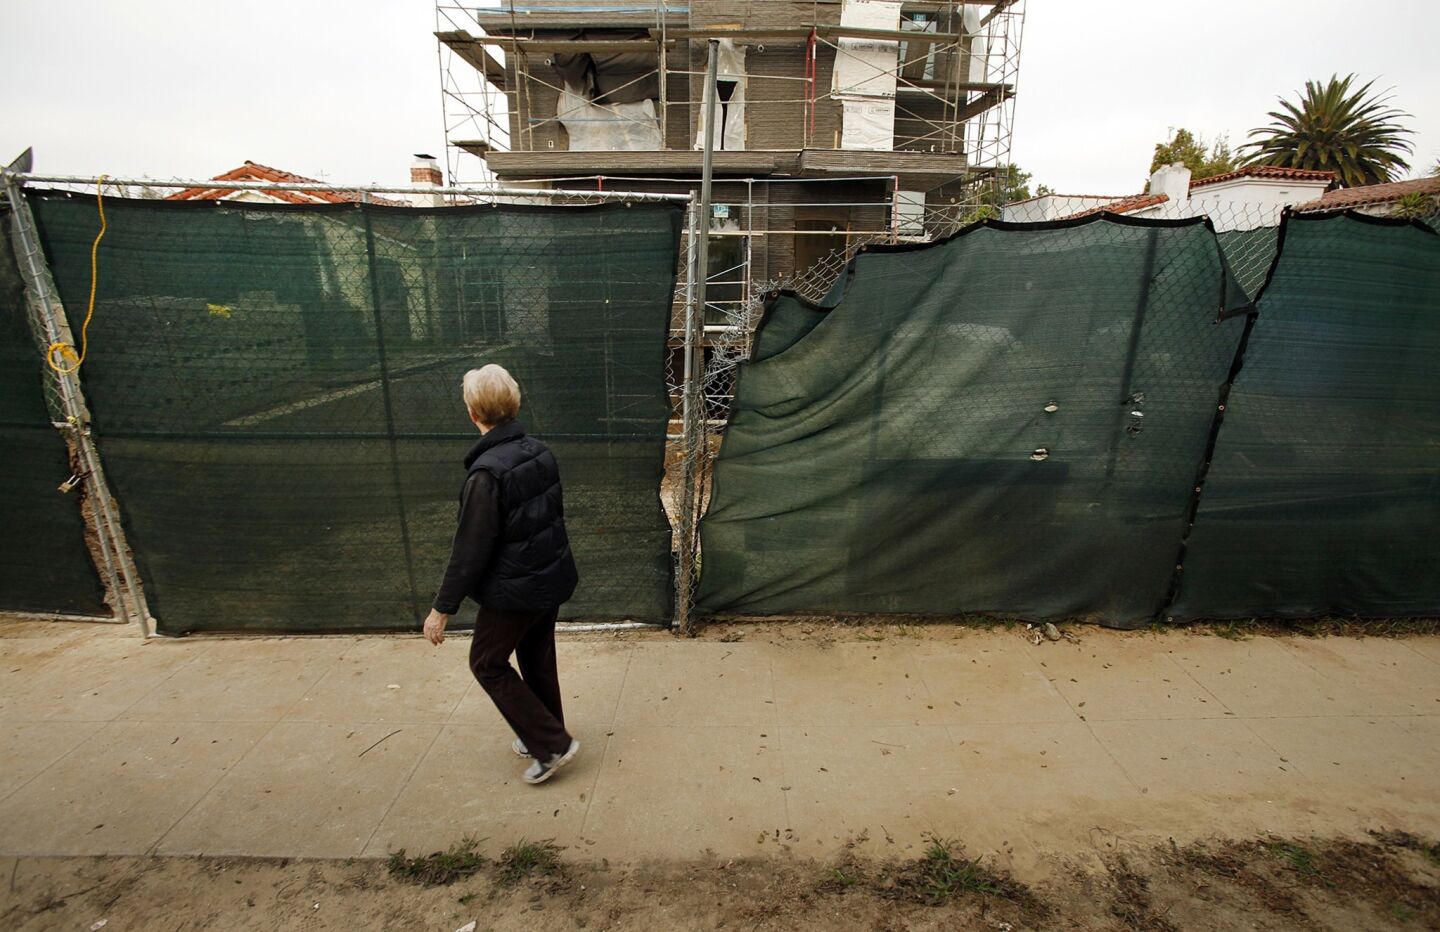 Bea Samples, who lives a few doors away, walks past a home under construction in Faircrest Heights. Neighbors believe several homes under construction in the area demonstrate examples of "mansionization" and are trying to bring attention to them.